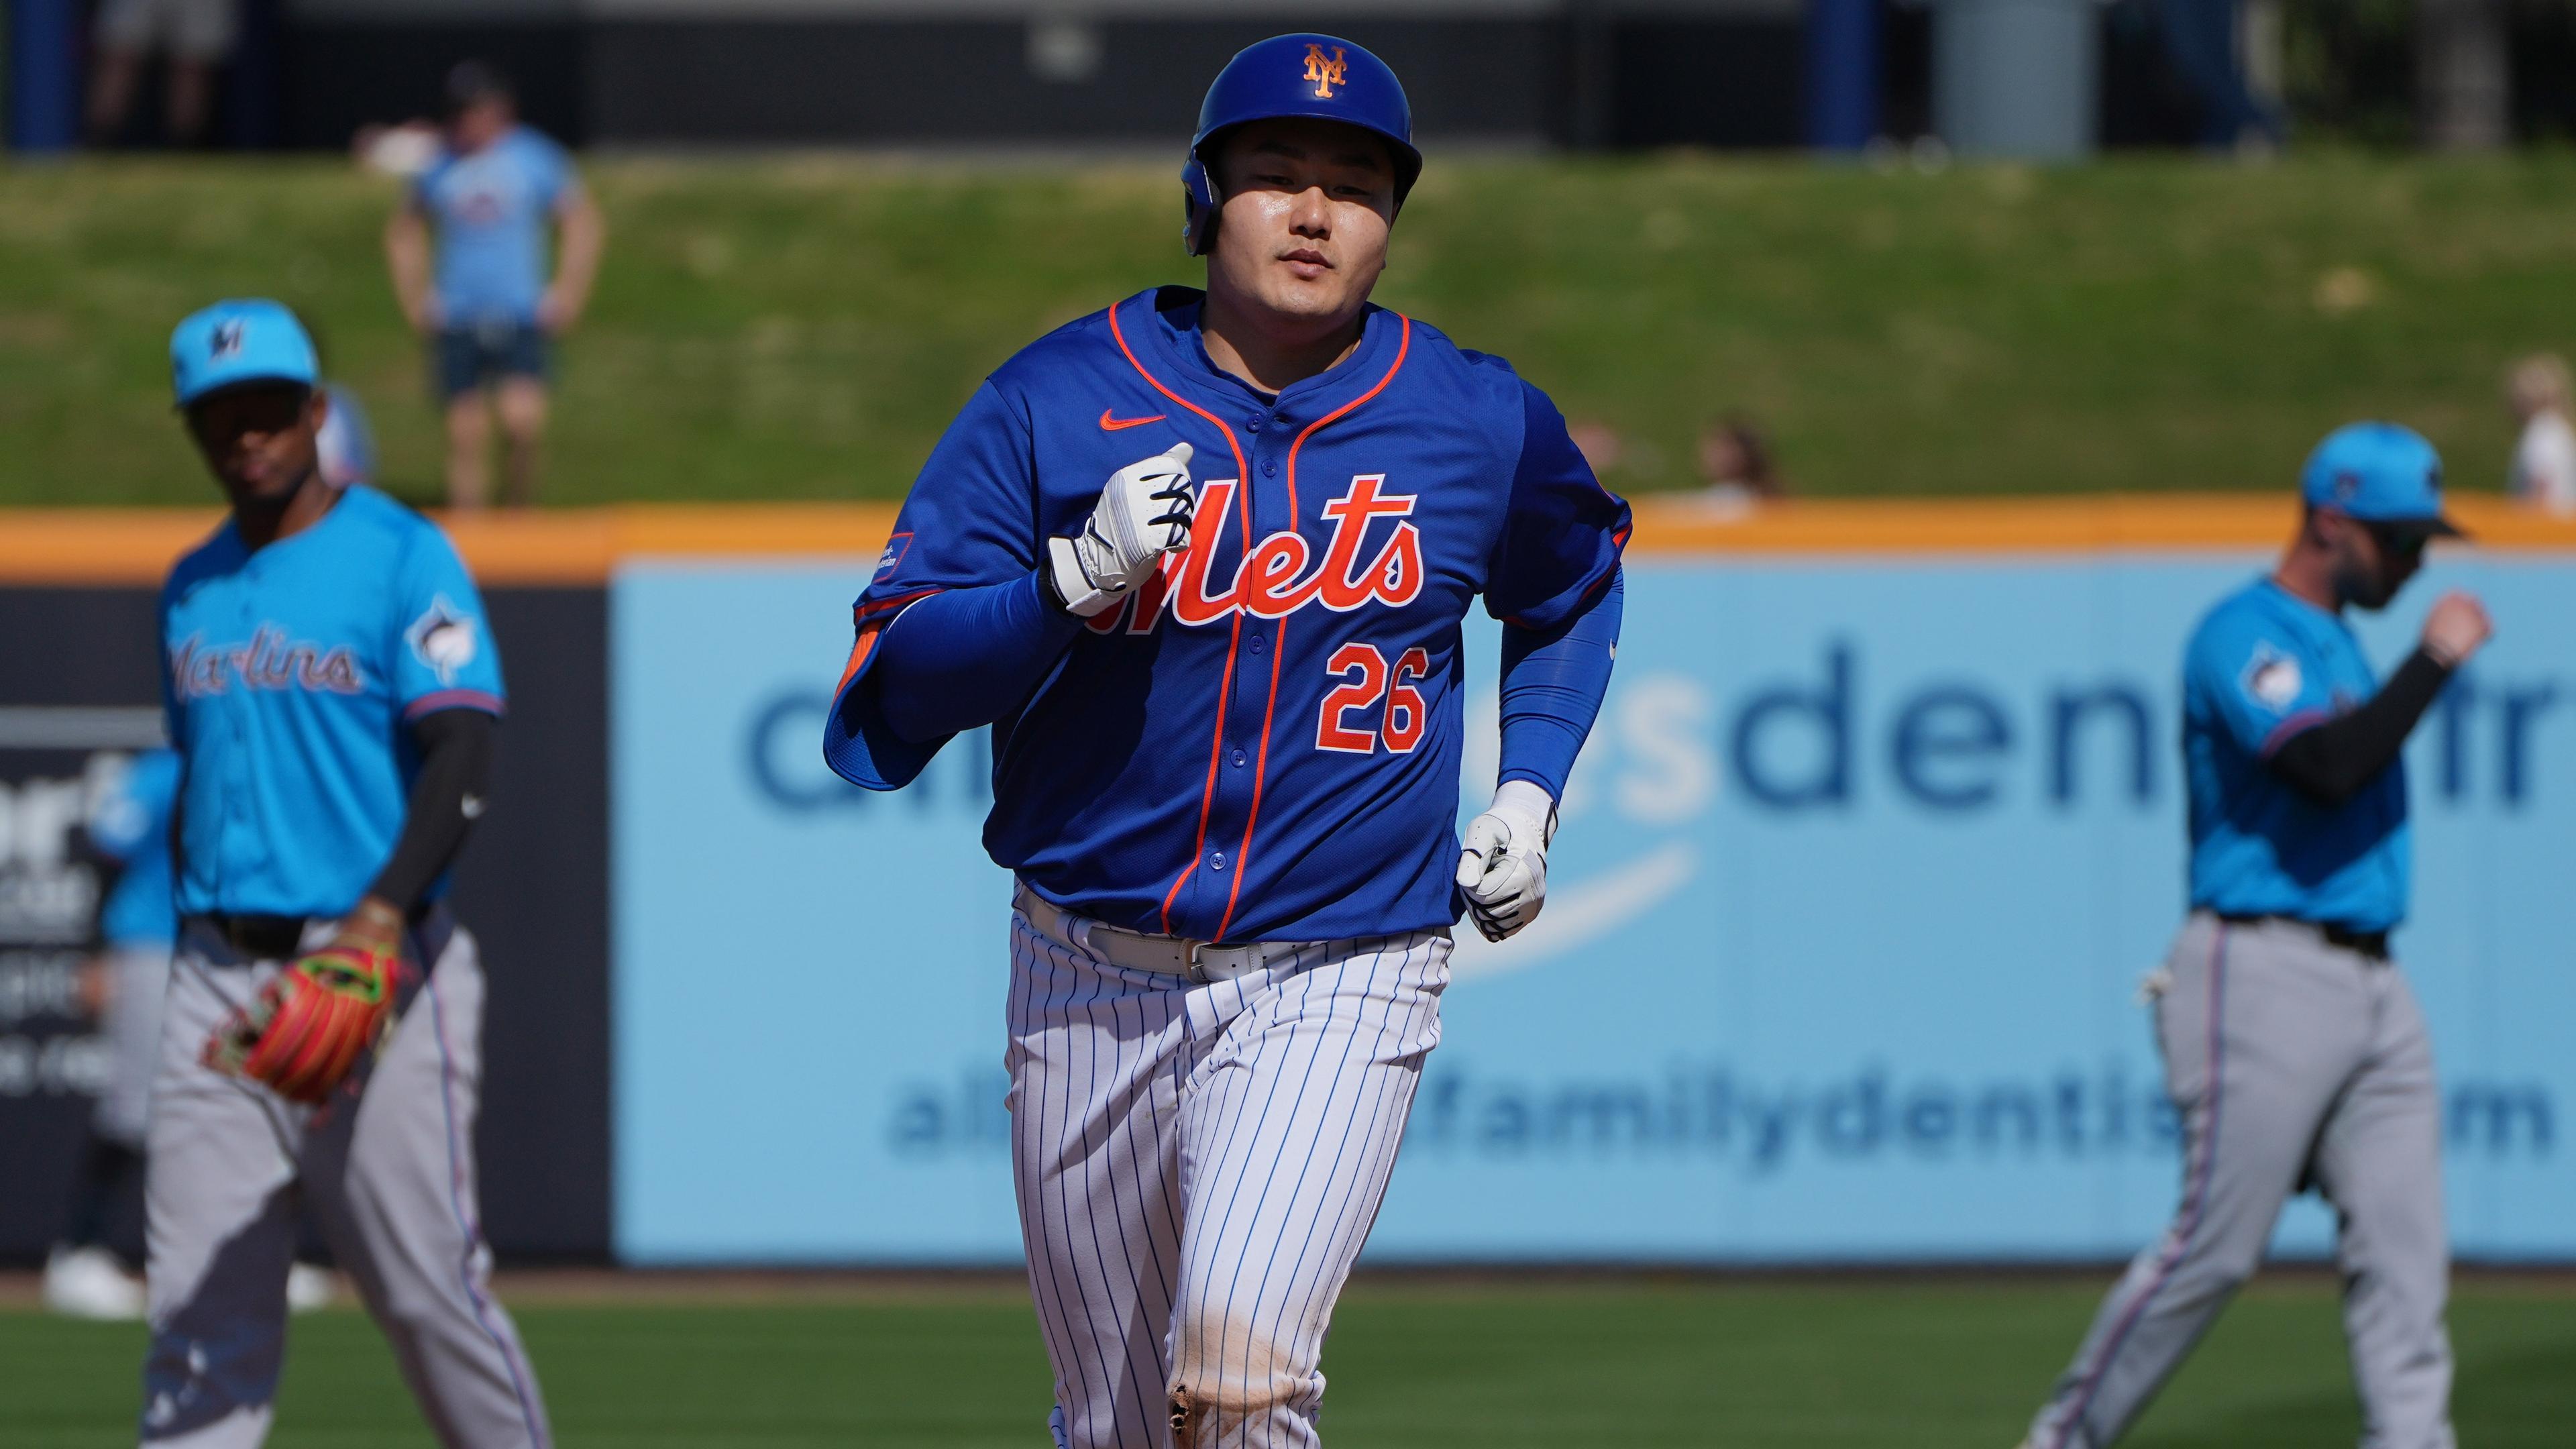 New York Mets first baseman Ji-Man Choi (26) rounds the bases after hitting a solo home run in the sixth inning against the Miami Marlins at Clover Park / Jim Rassol - USA TODAY Sports